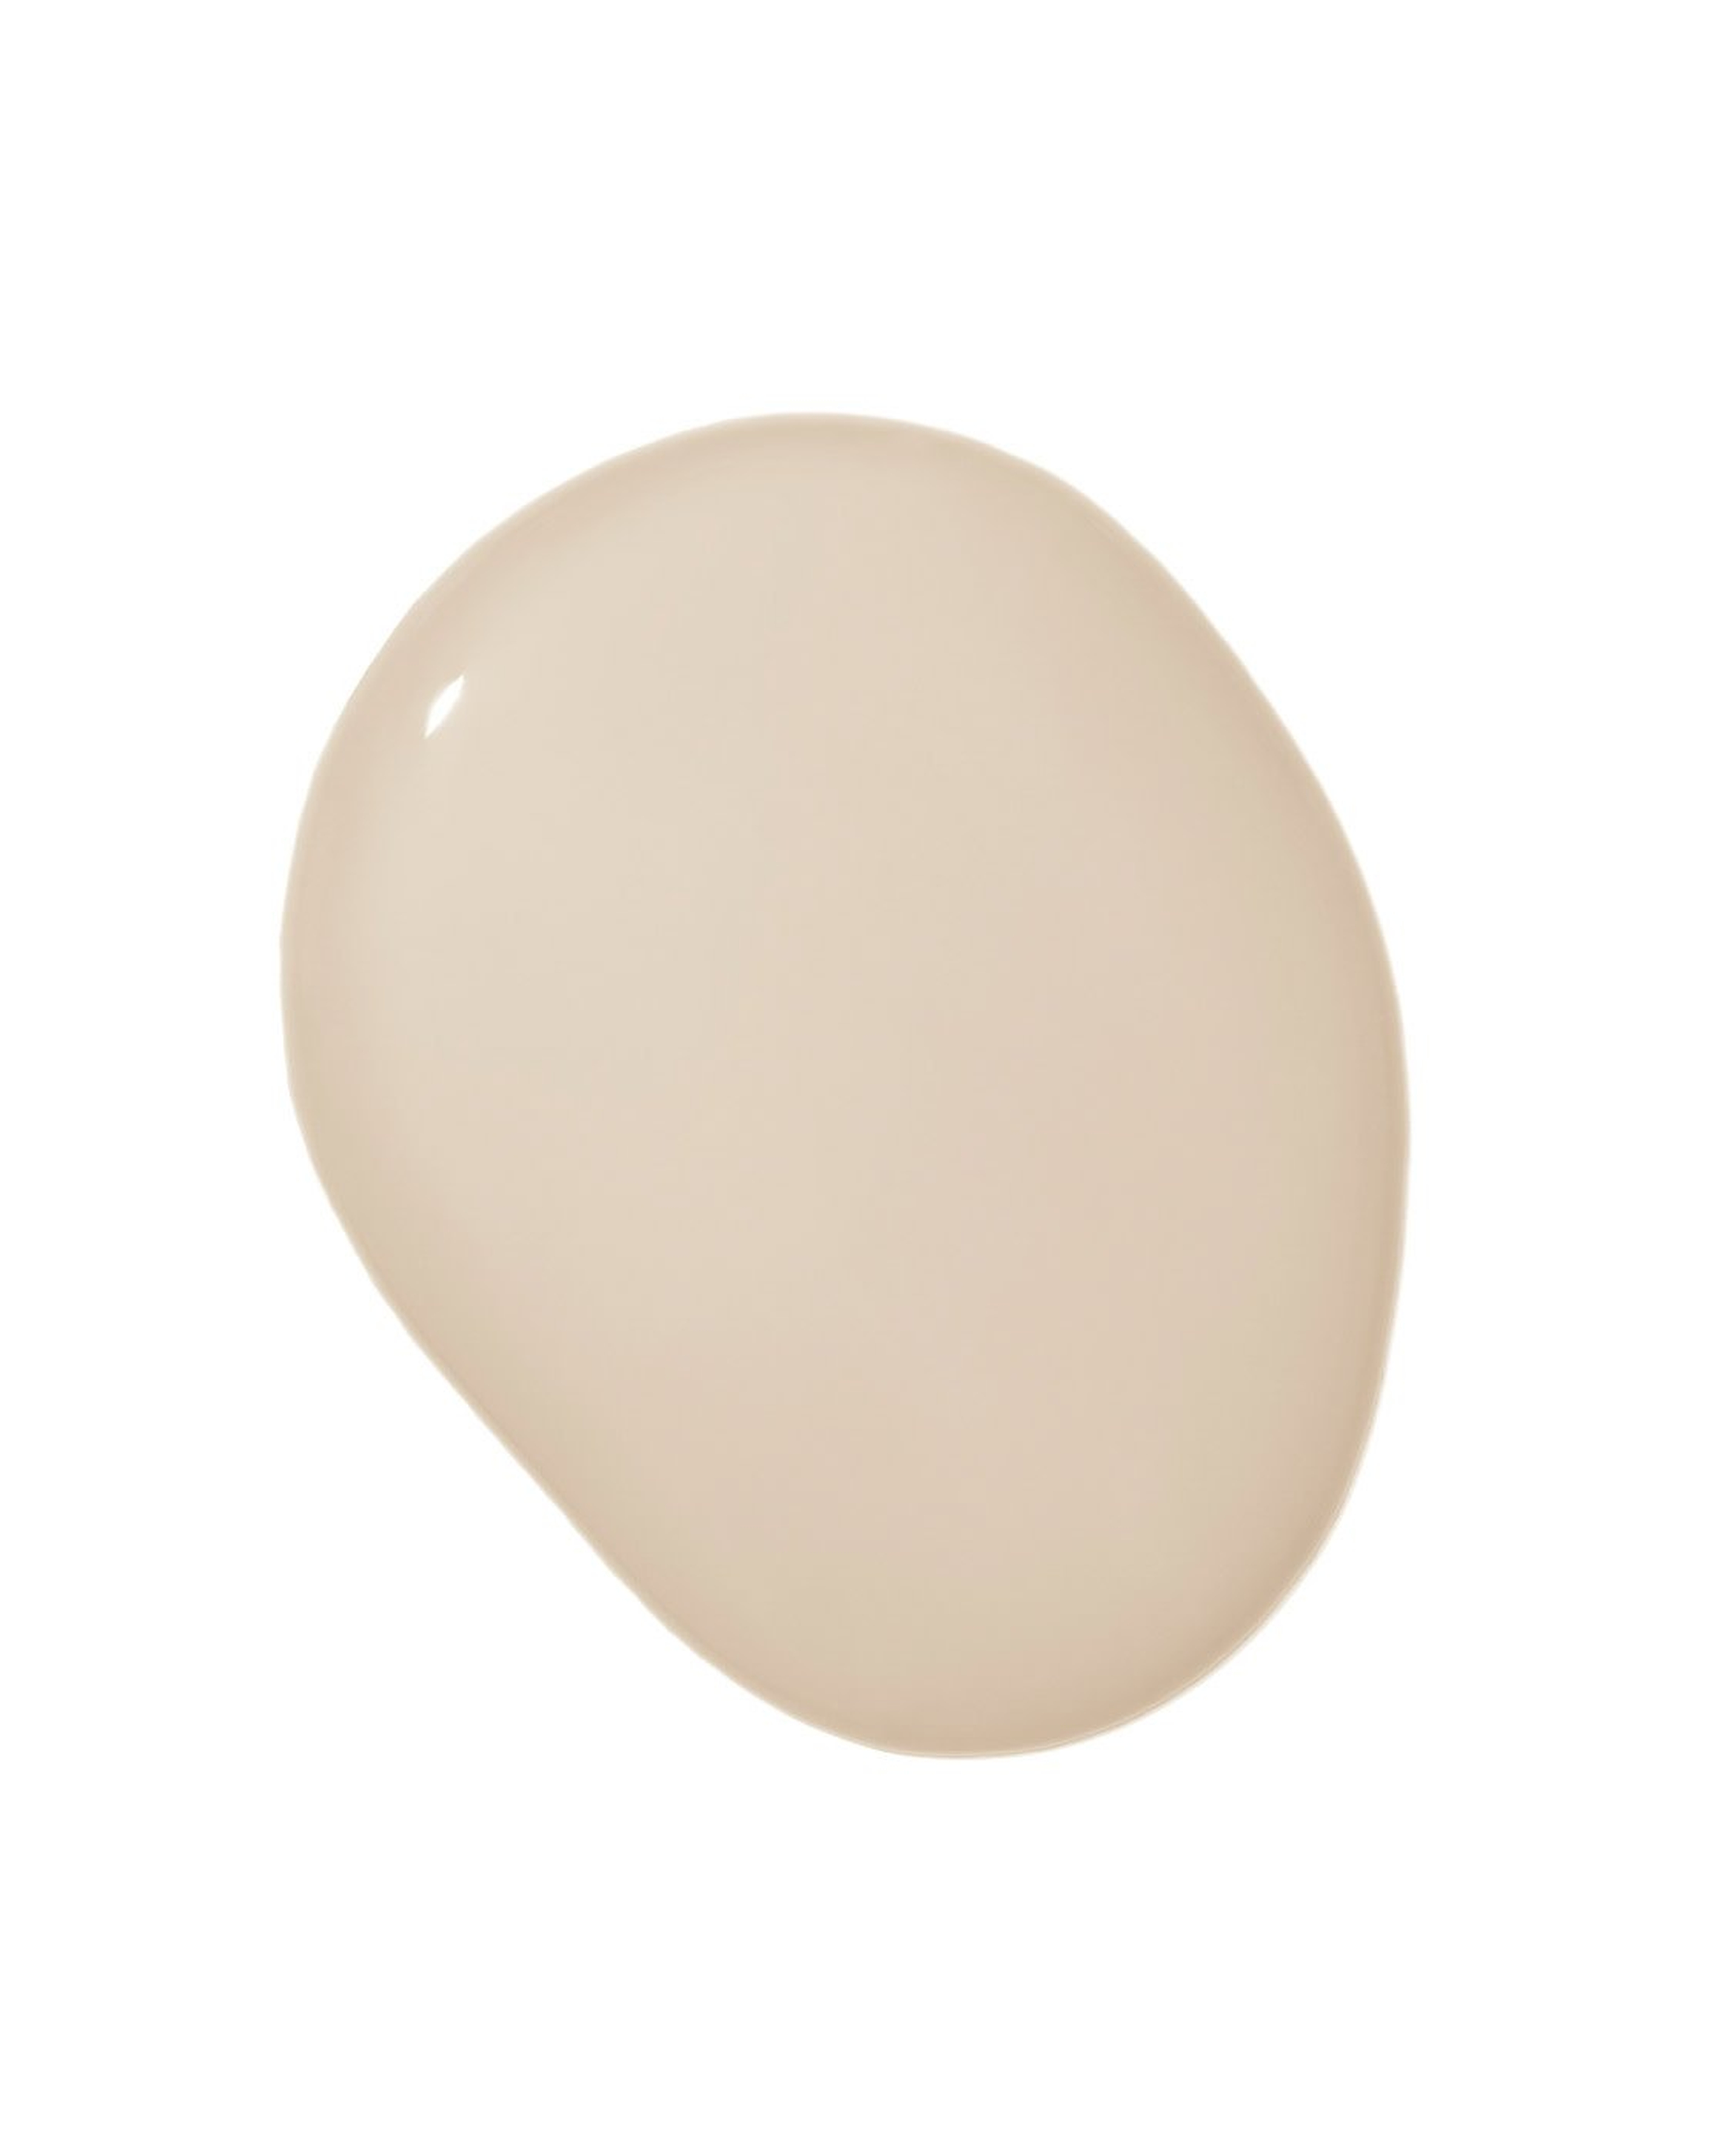 Clare Paint - Neutral Territory - Wall Swatch - Clare Paint